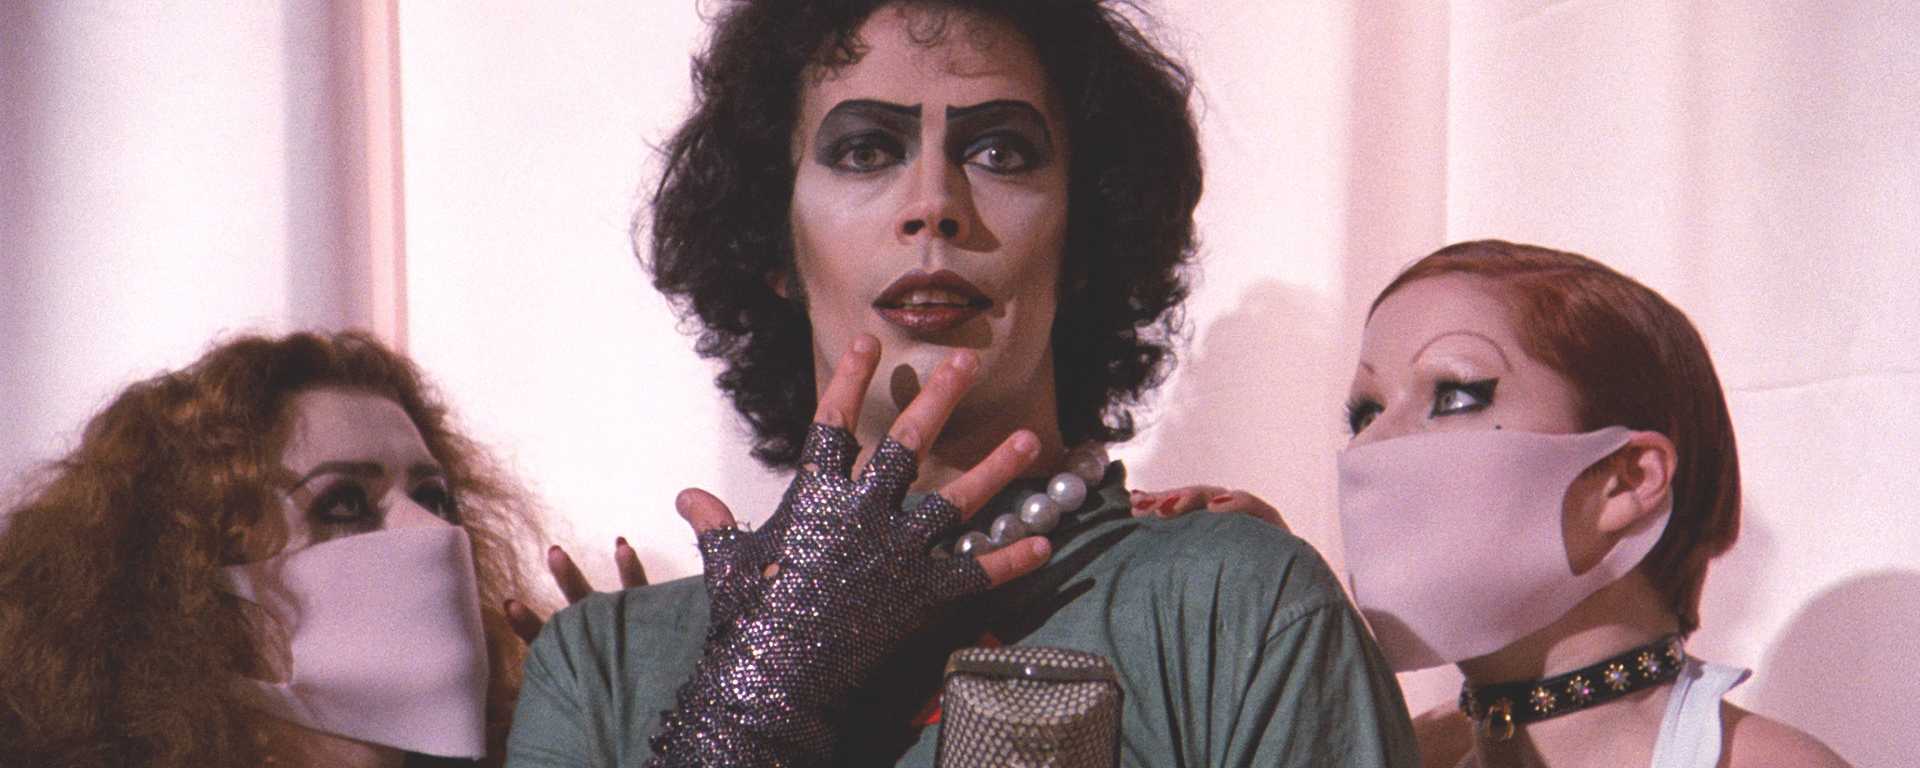 "Rocky Horror Picture Show" starring Tim Curry